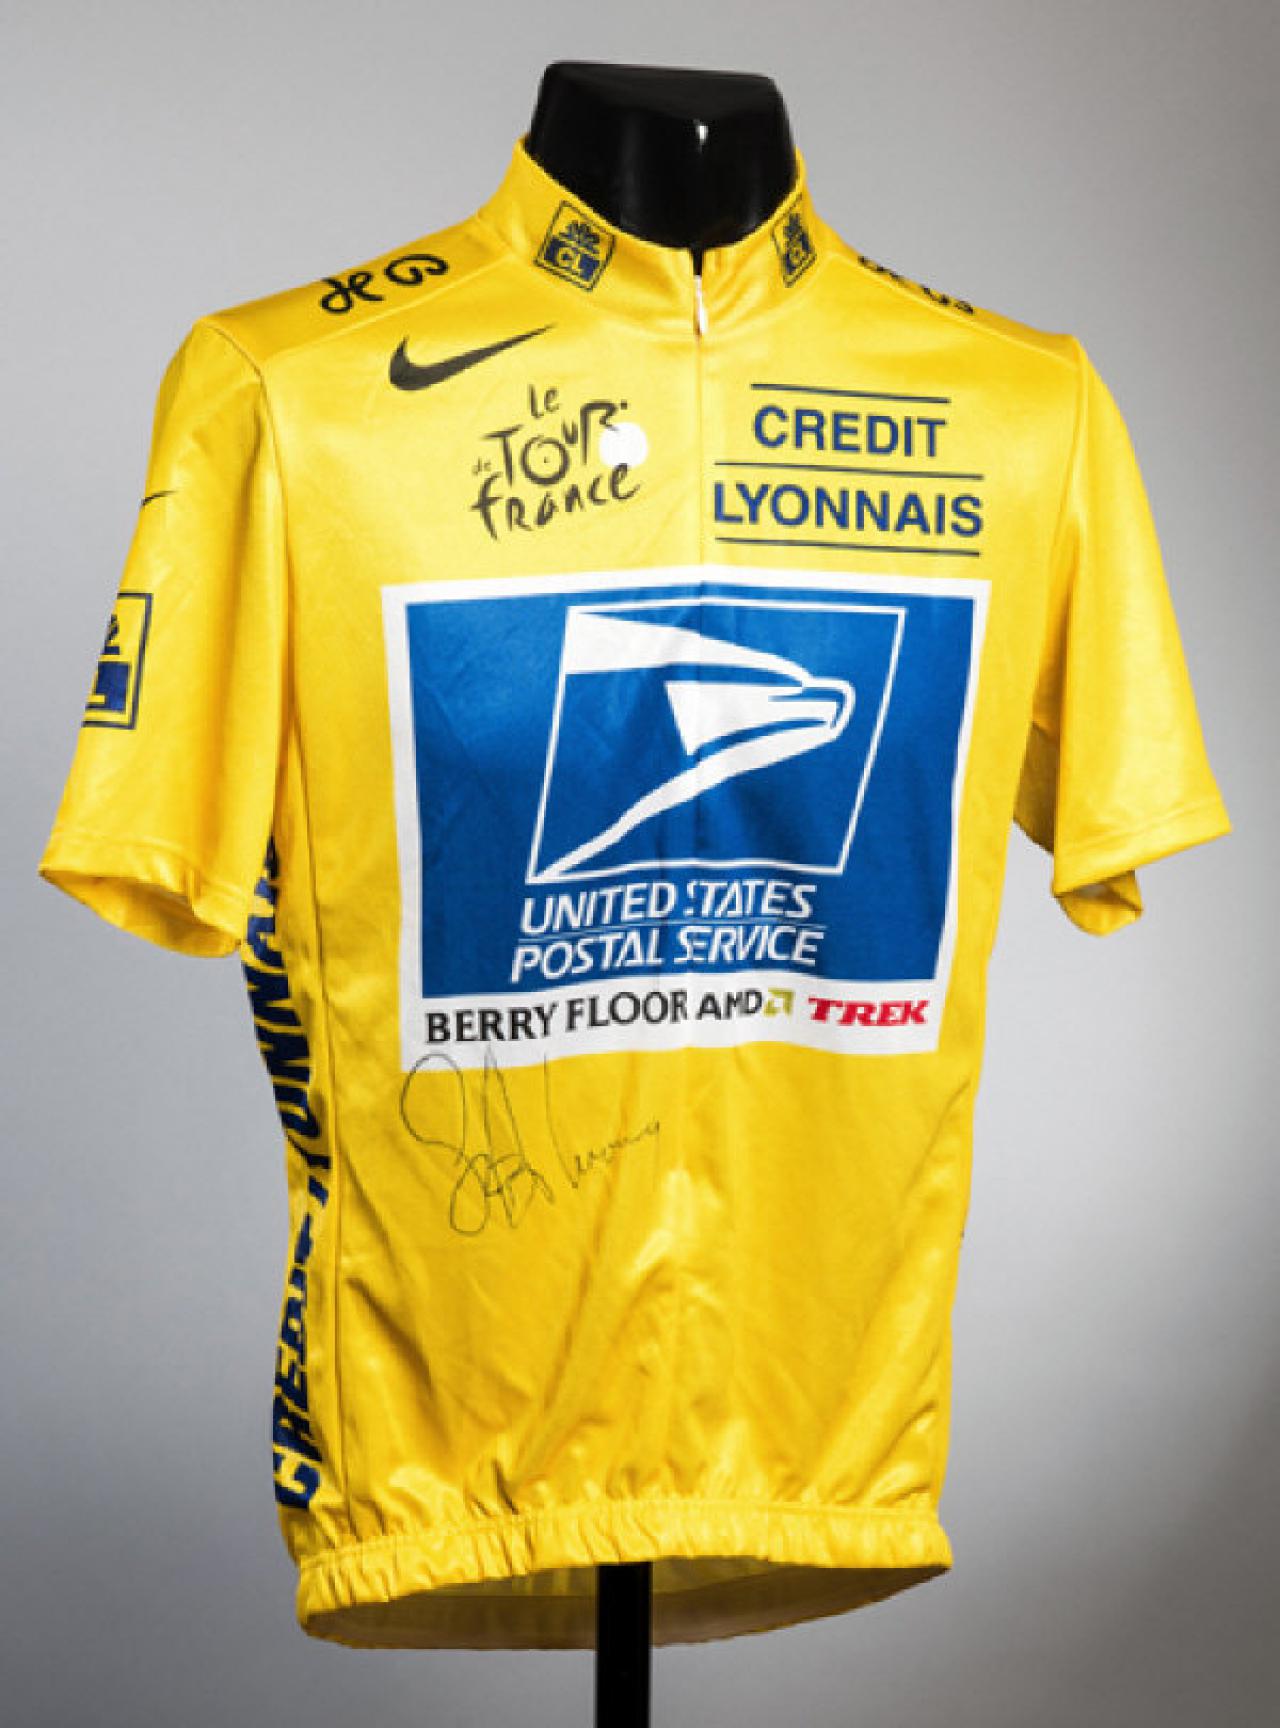 Lance Armstrong yellow jersey goes for 